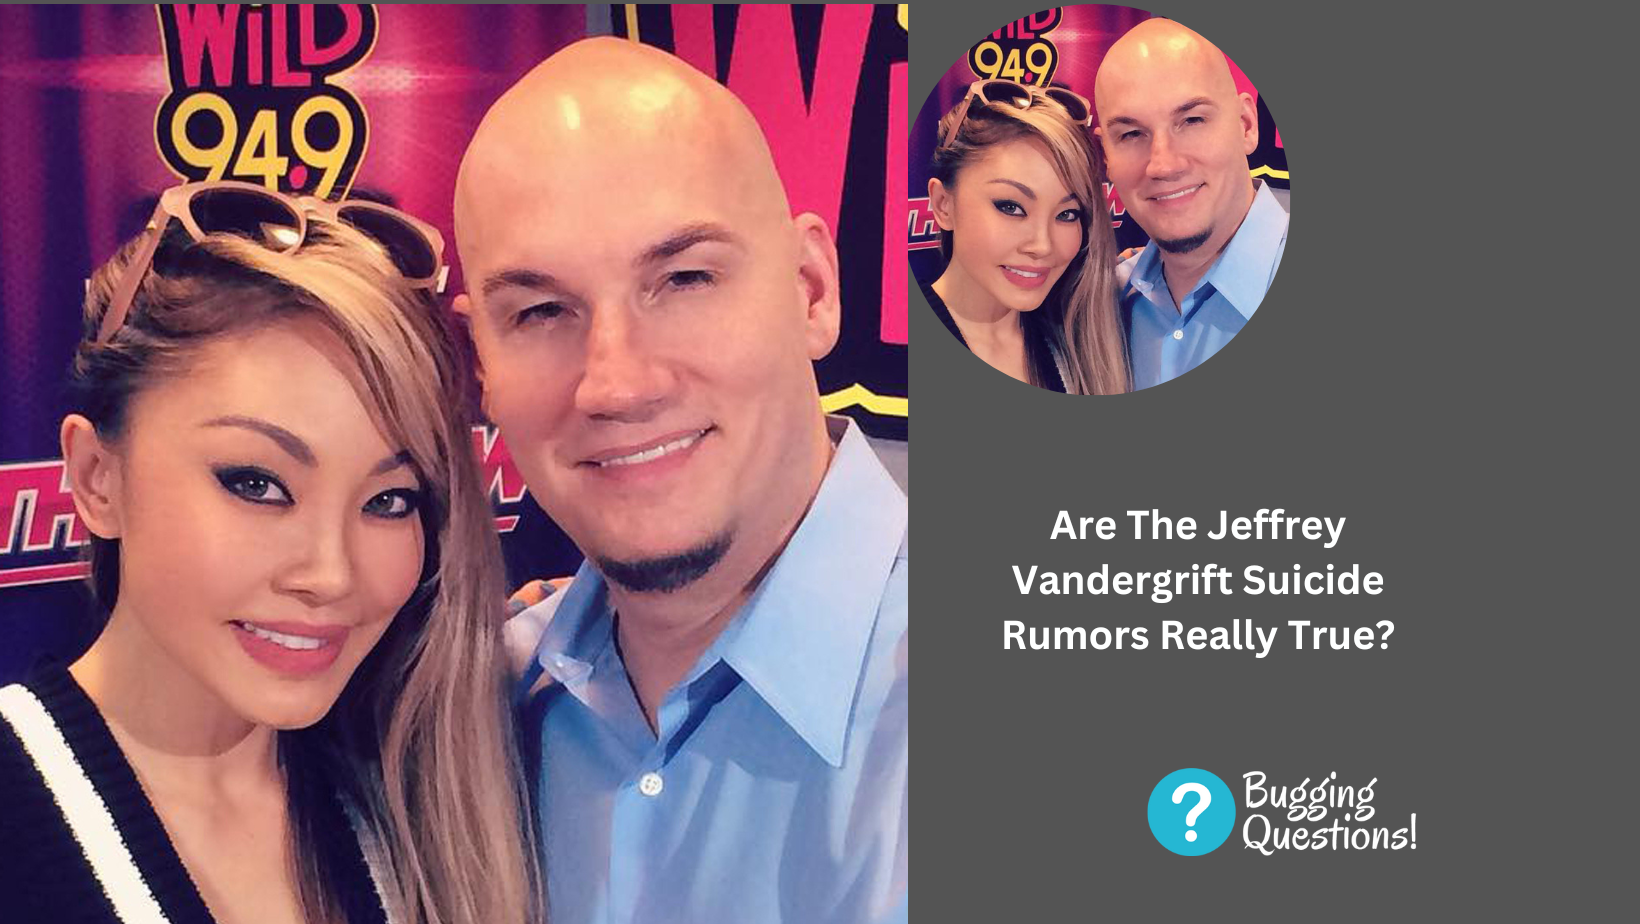 Are The Jeffrey Vandergrift Suicide Rumors Really True? Missing Case And Wikipedia Details